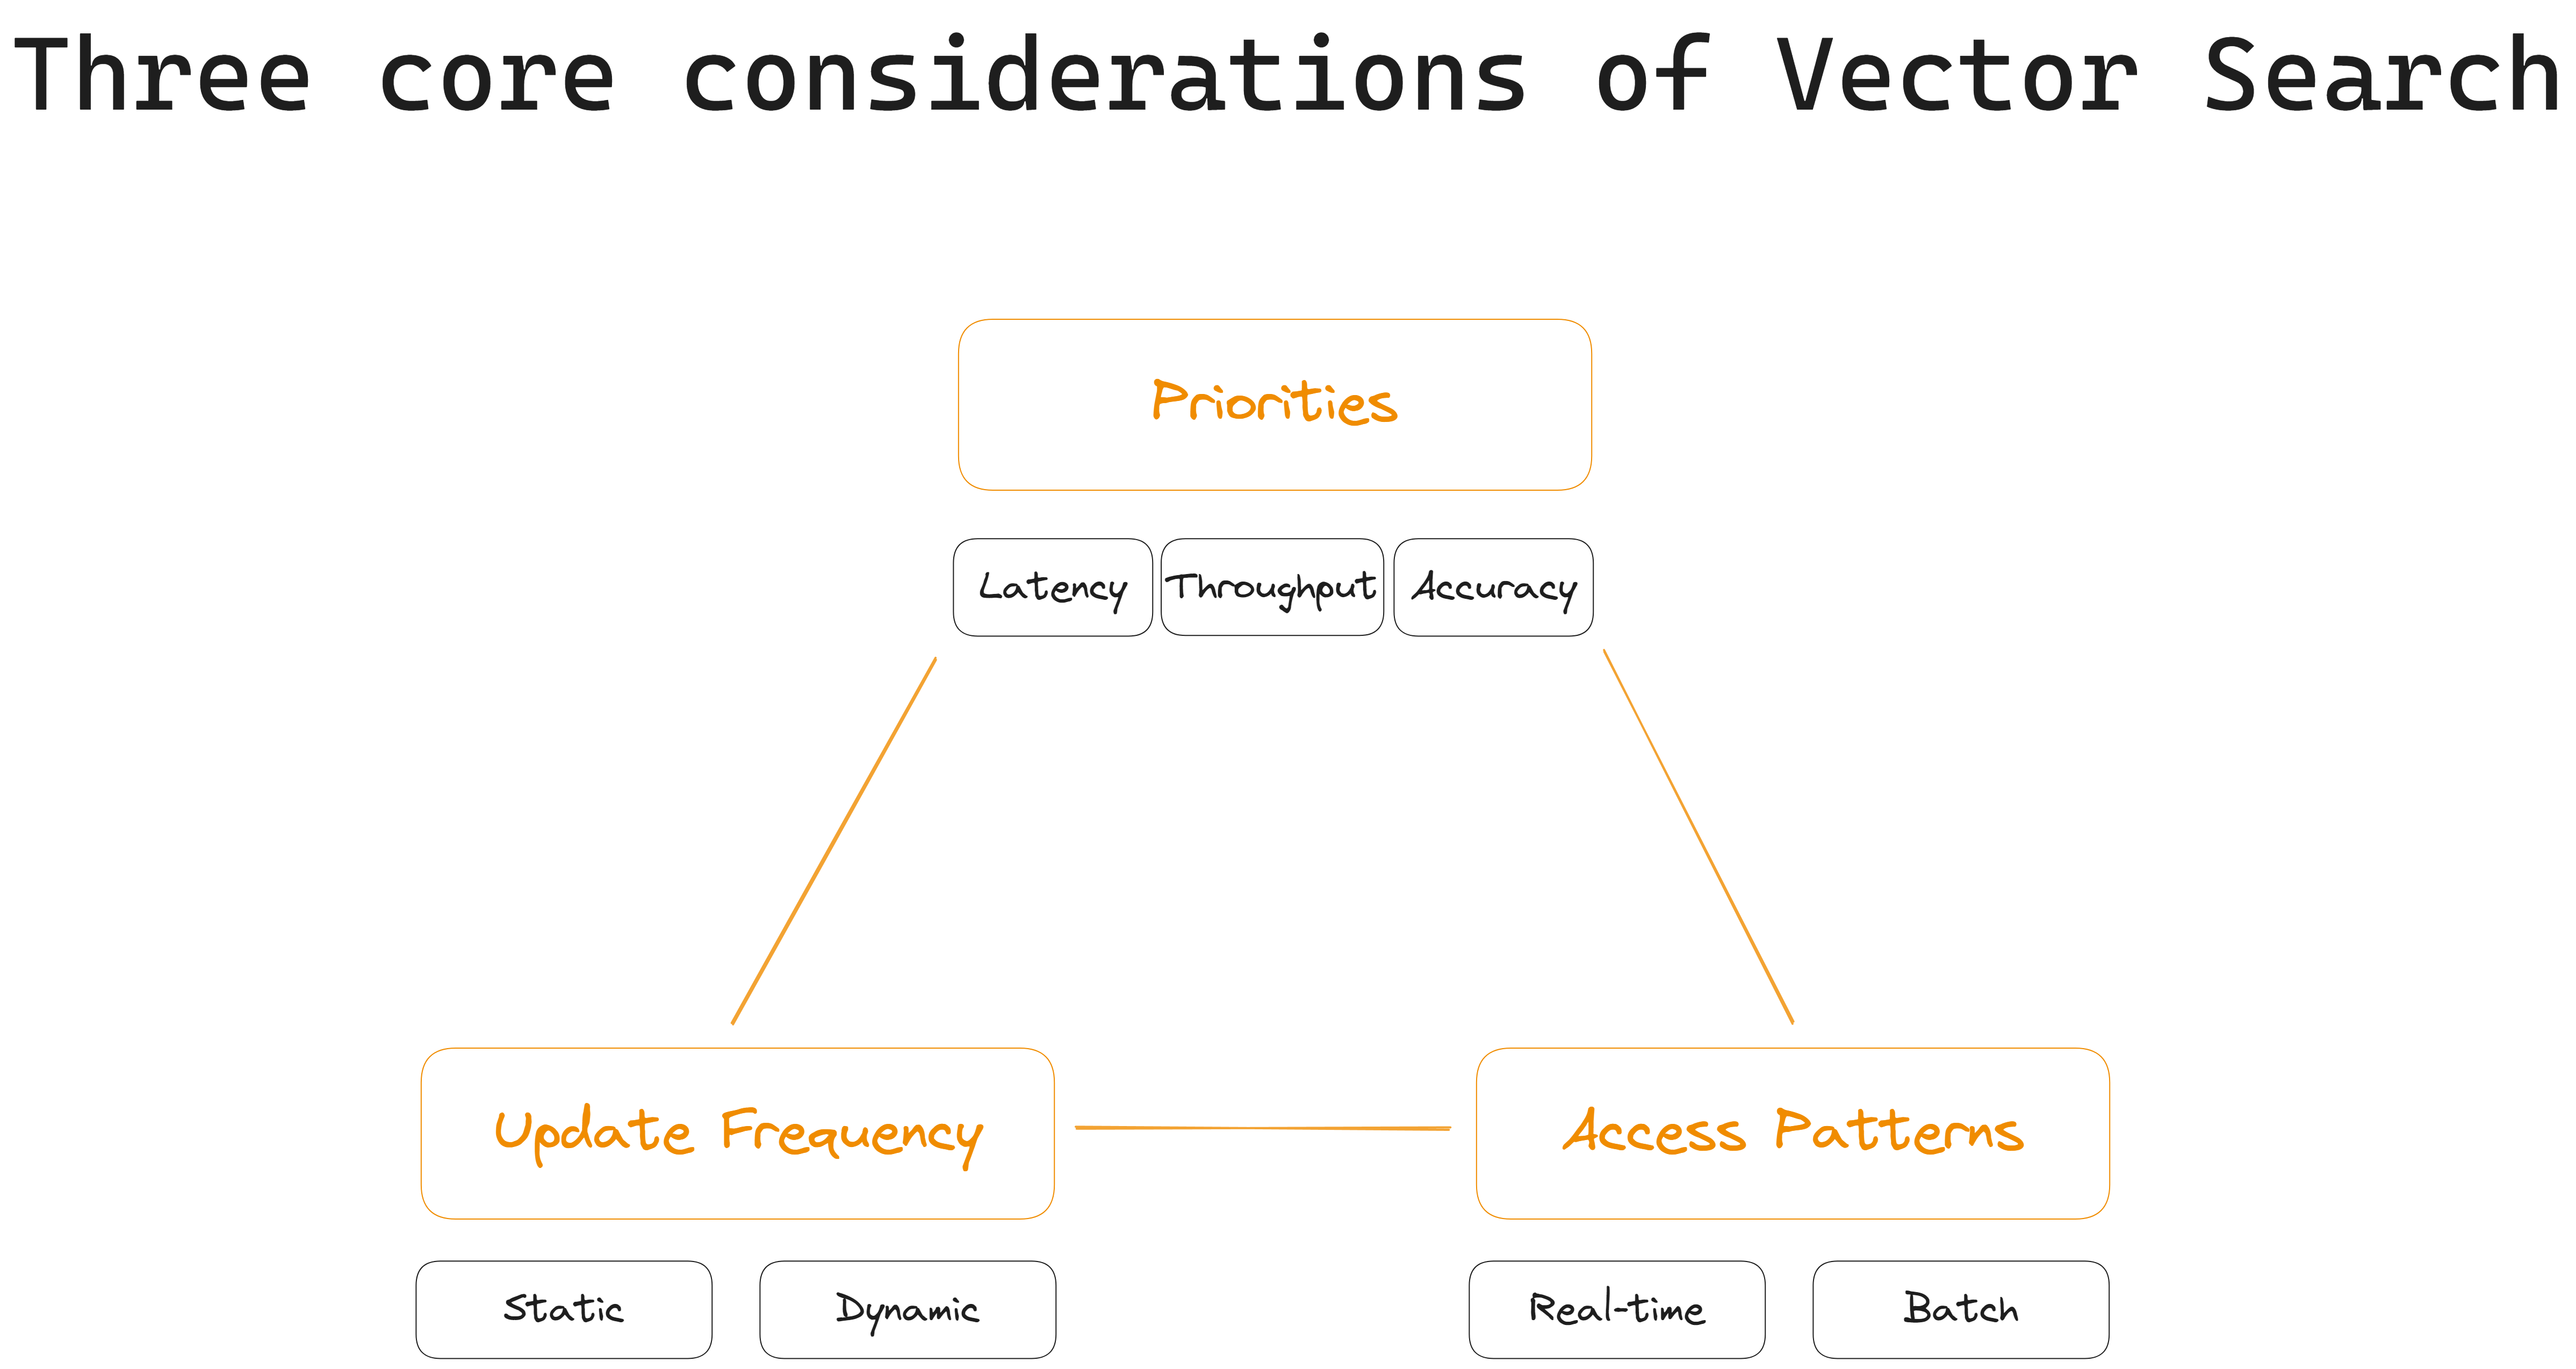 Three core considerations of Vector Search